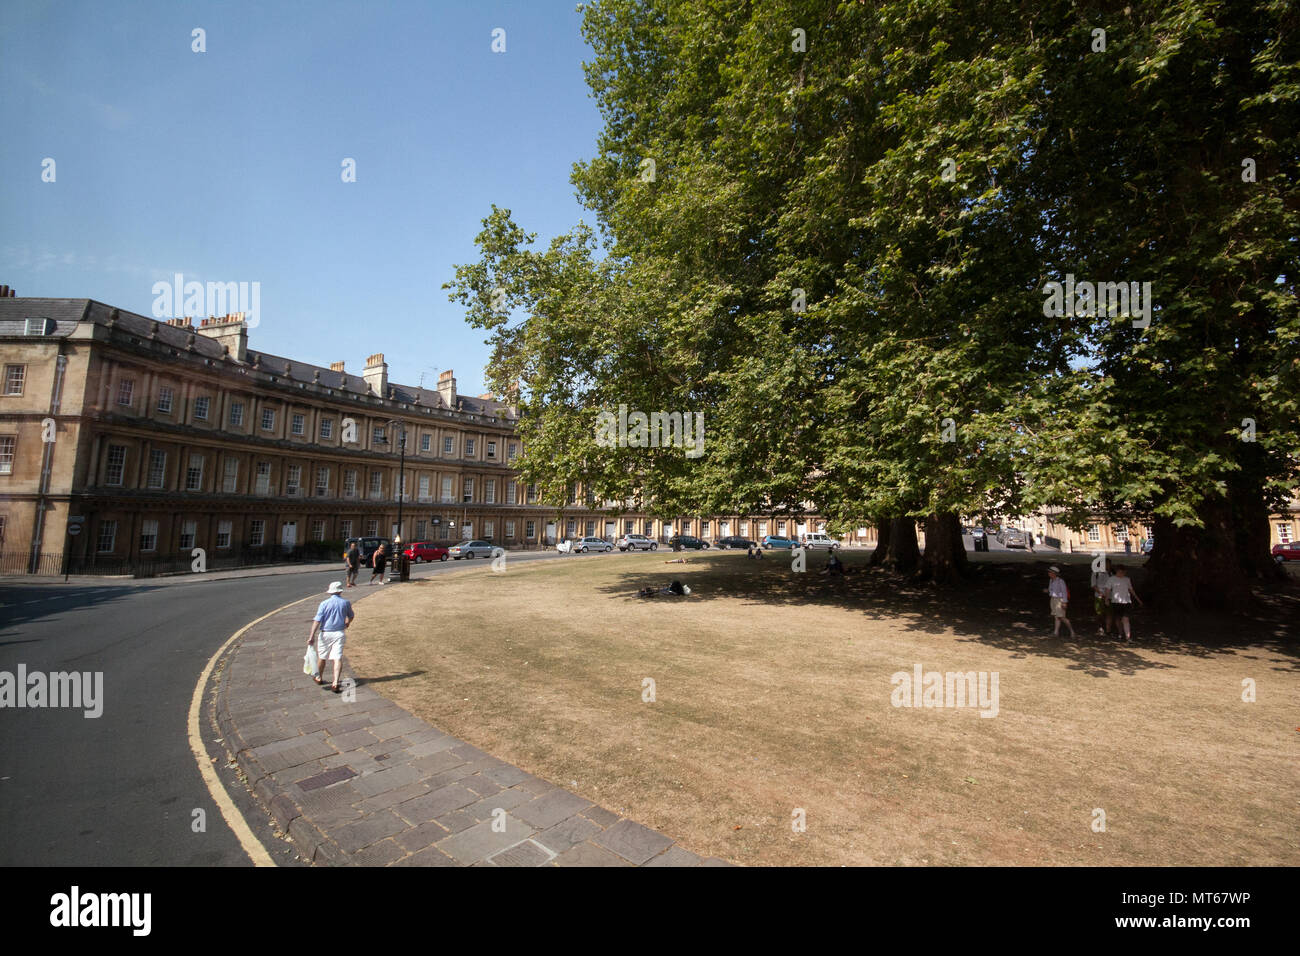 The circus trees in front of crescent buildings in city of Bath, England, UK. Stock Photo